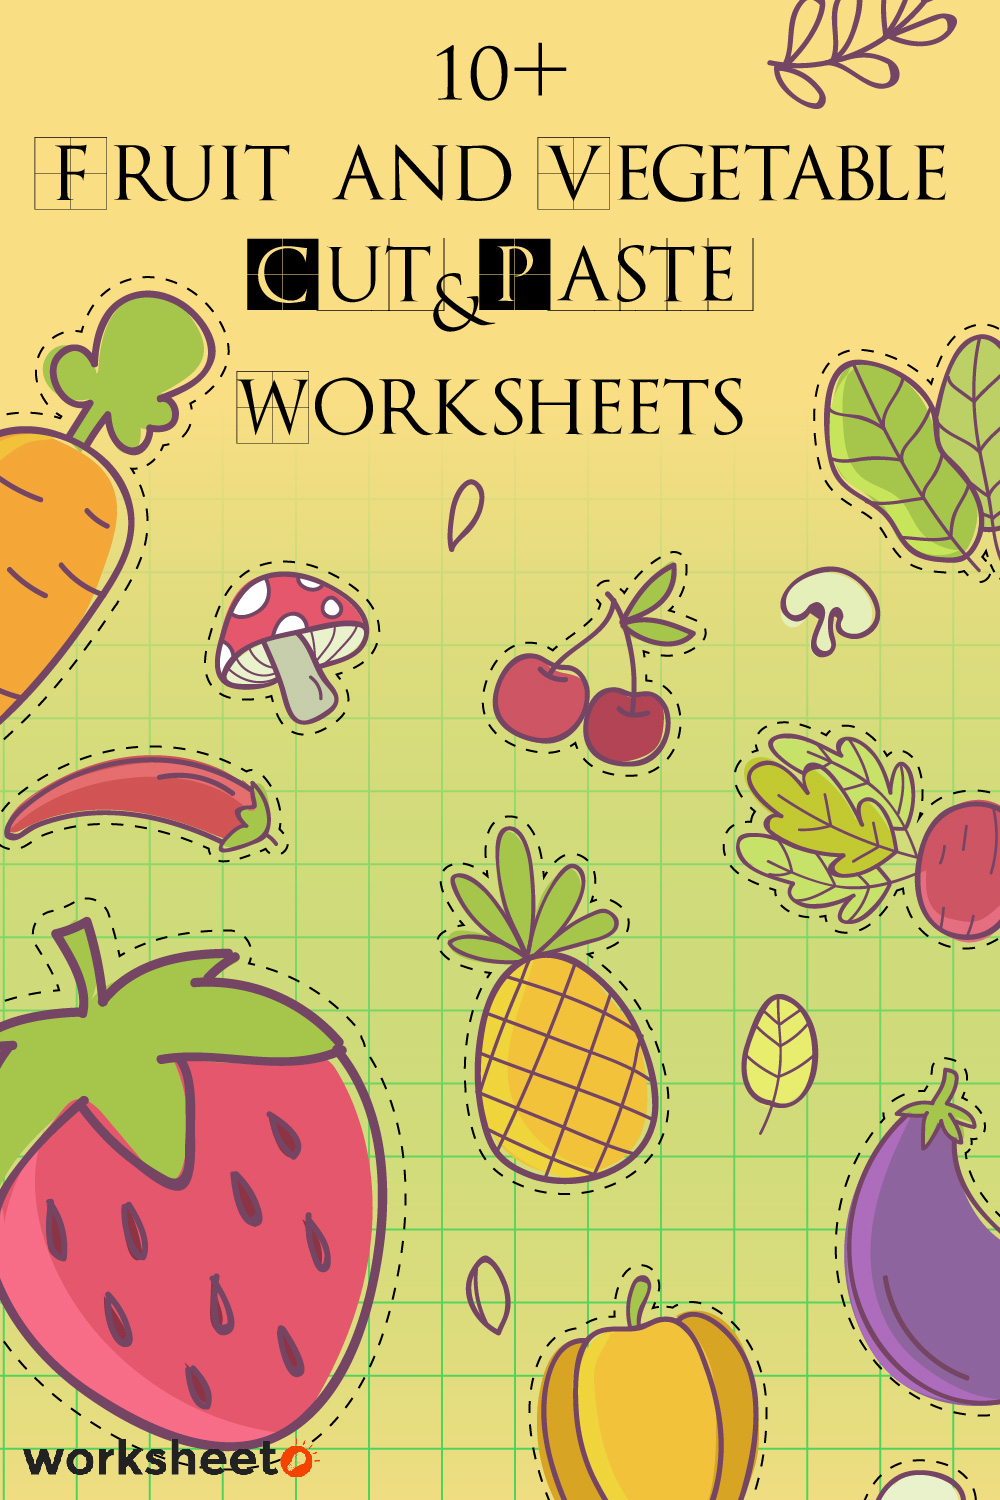 17 Images of Fruit And Vegetable Cut And Paste Worksheets